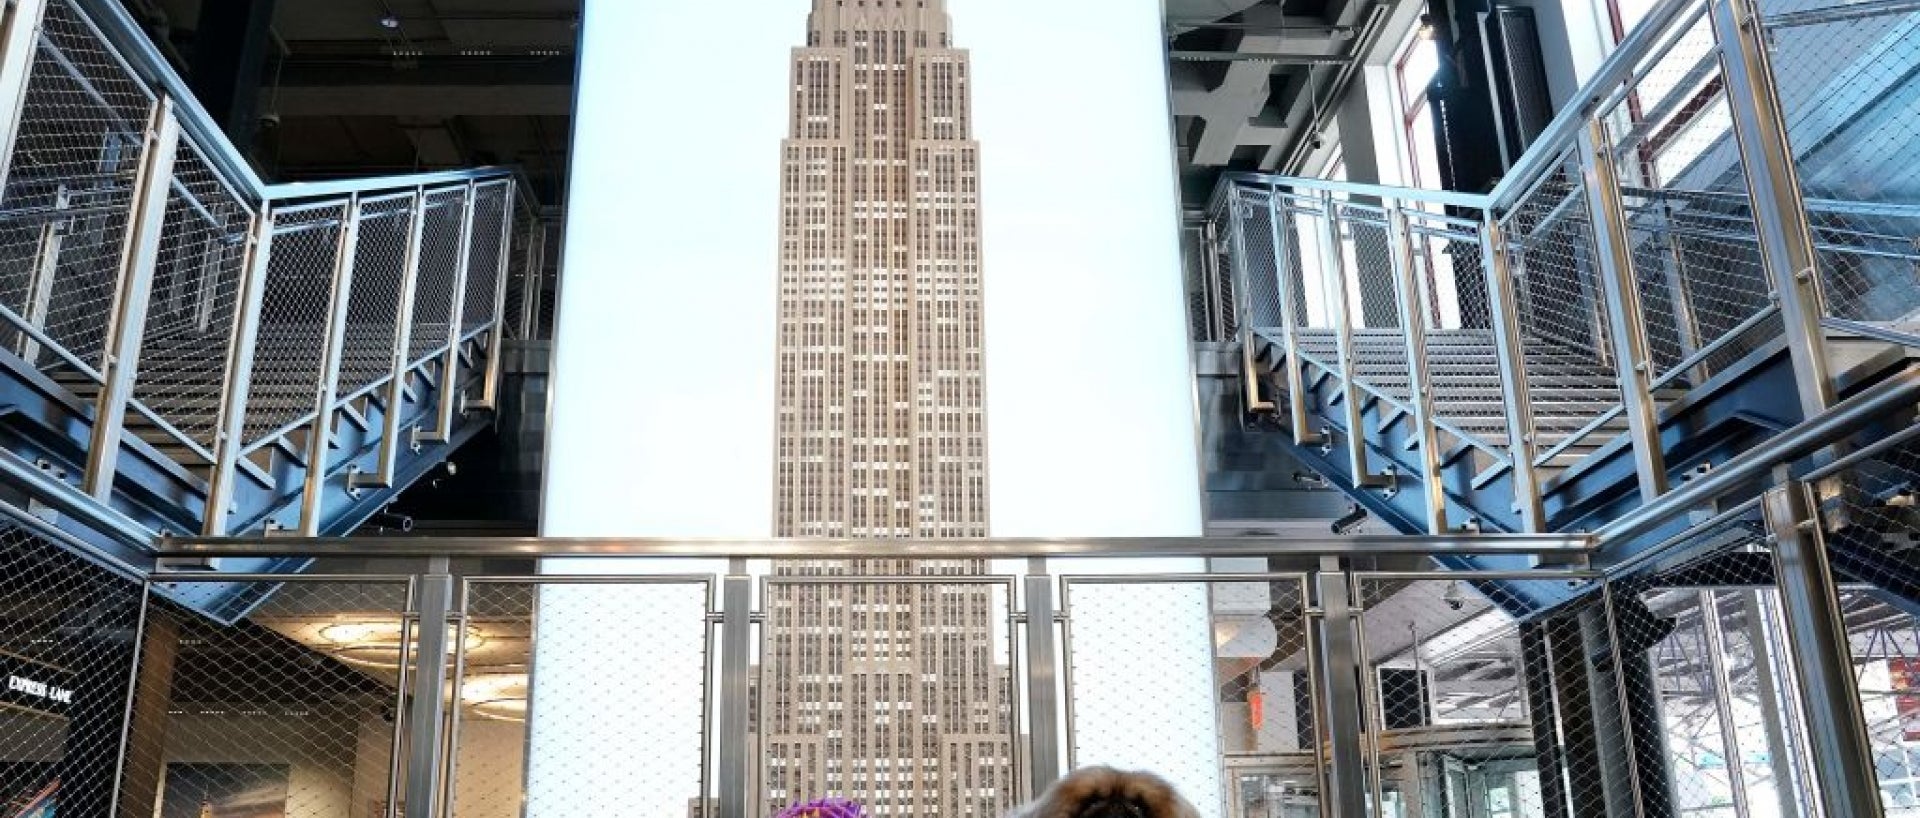 Best in show from 2020 shown in front of NYC building